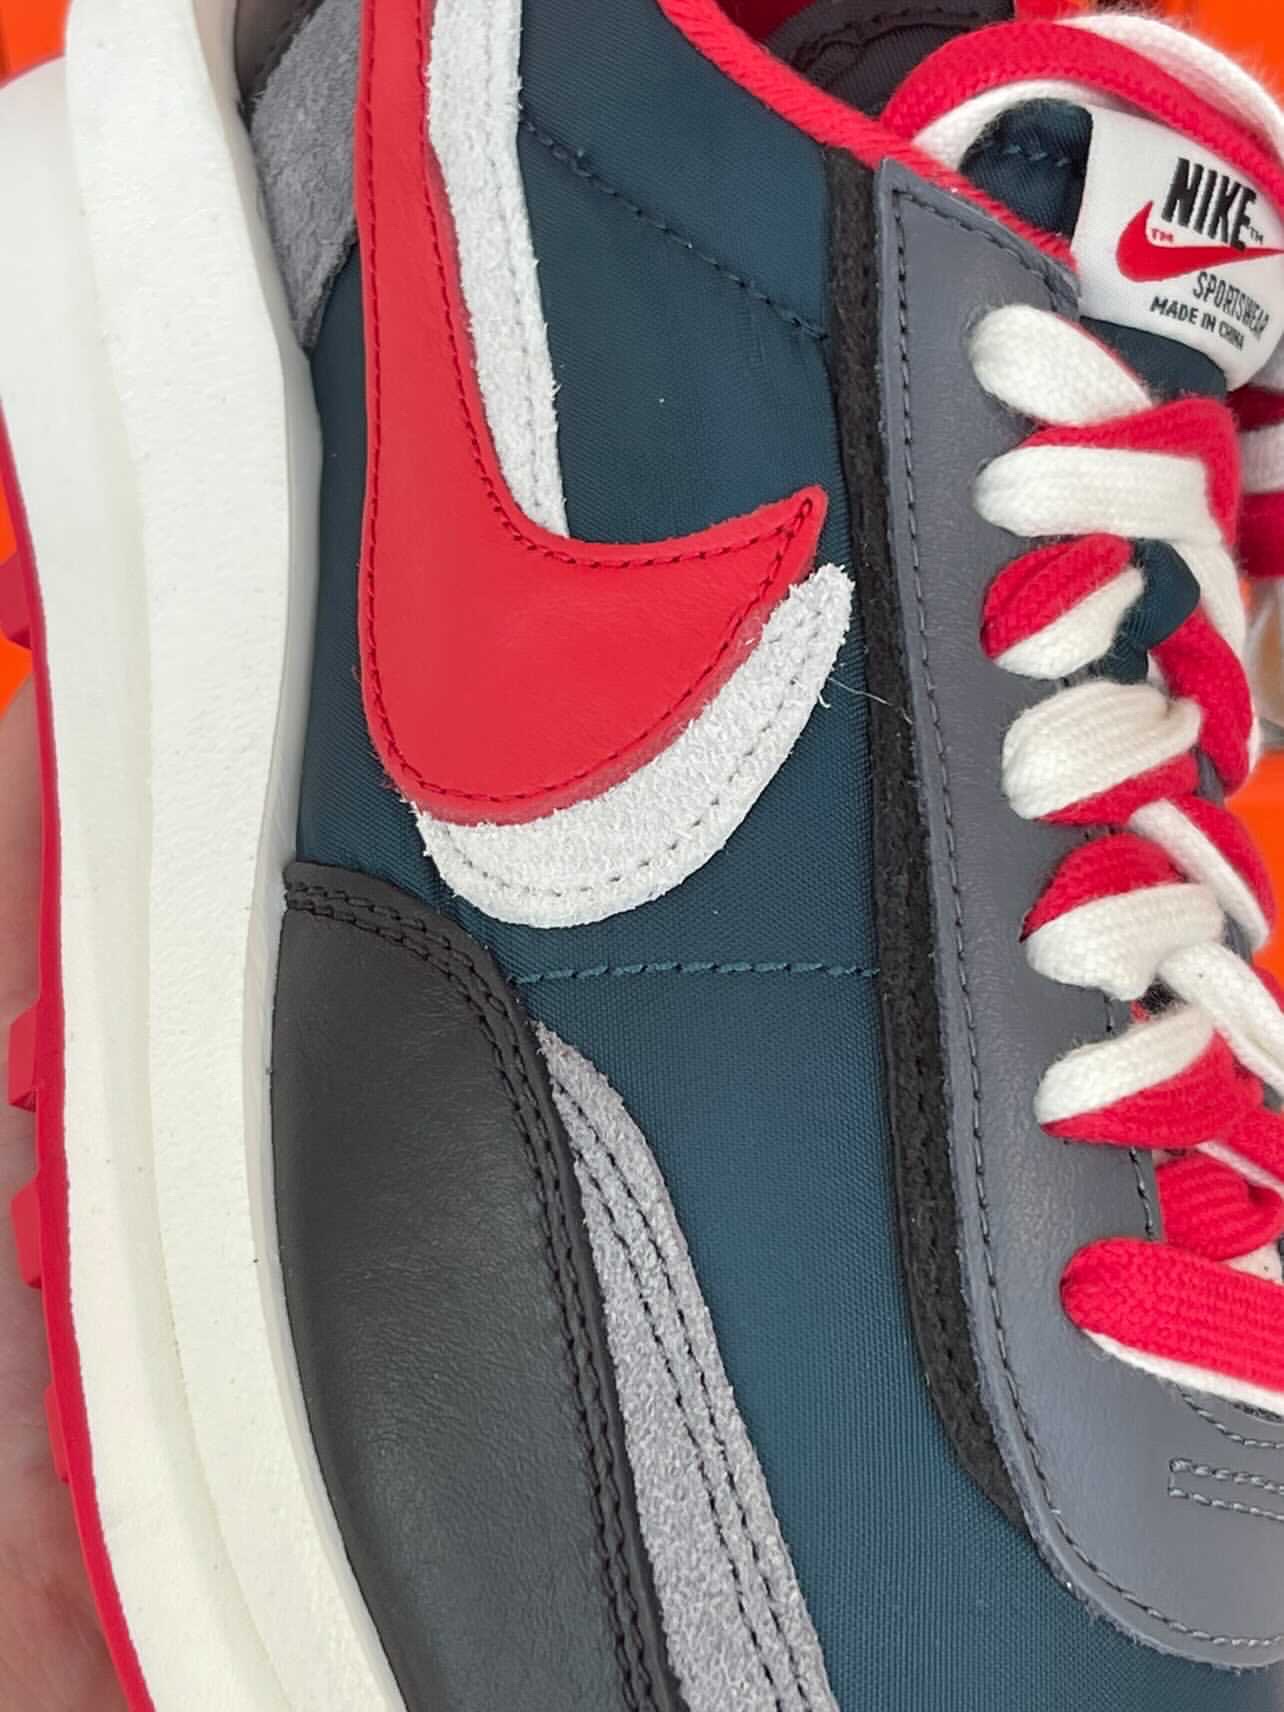 Undercover Sacai undercover sacai waffle Nike LDWaffle 2021 Release Date Info | SneakerFiles